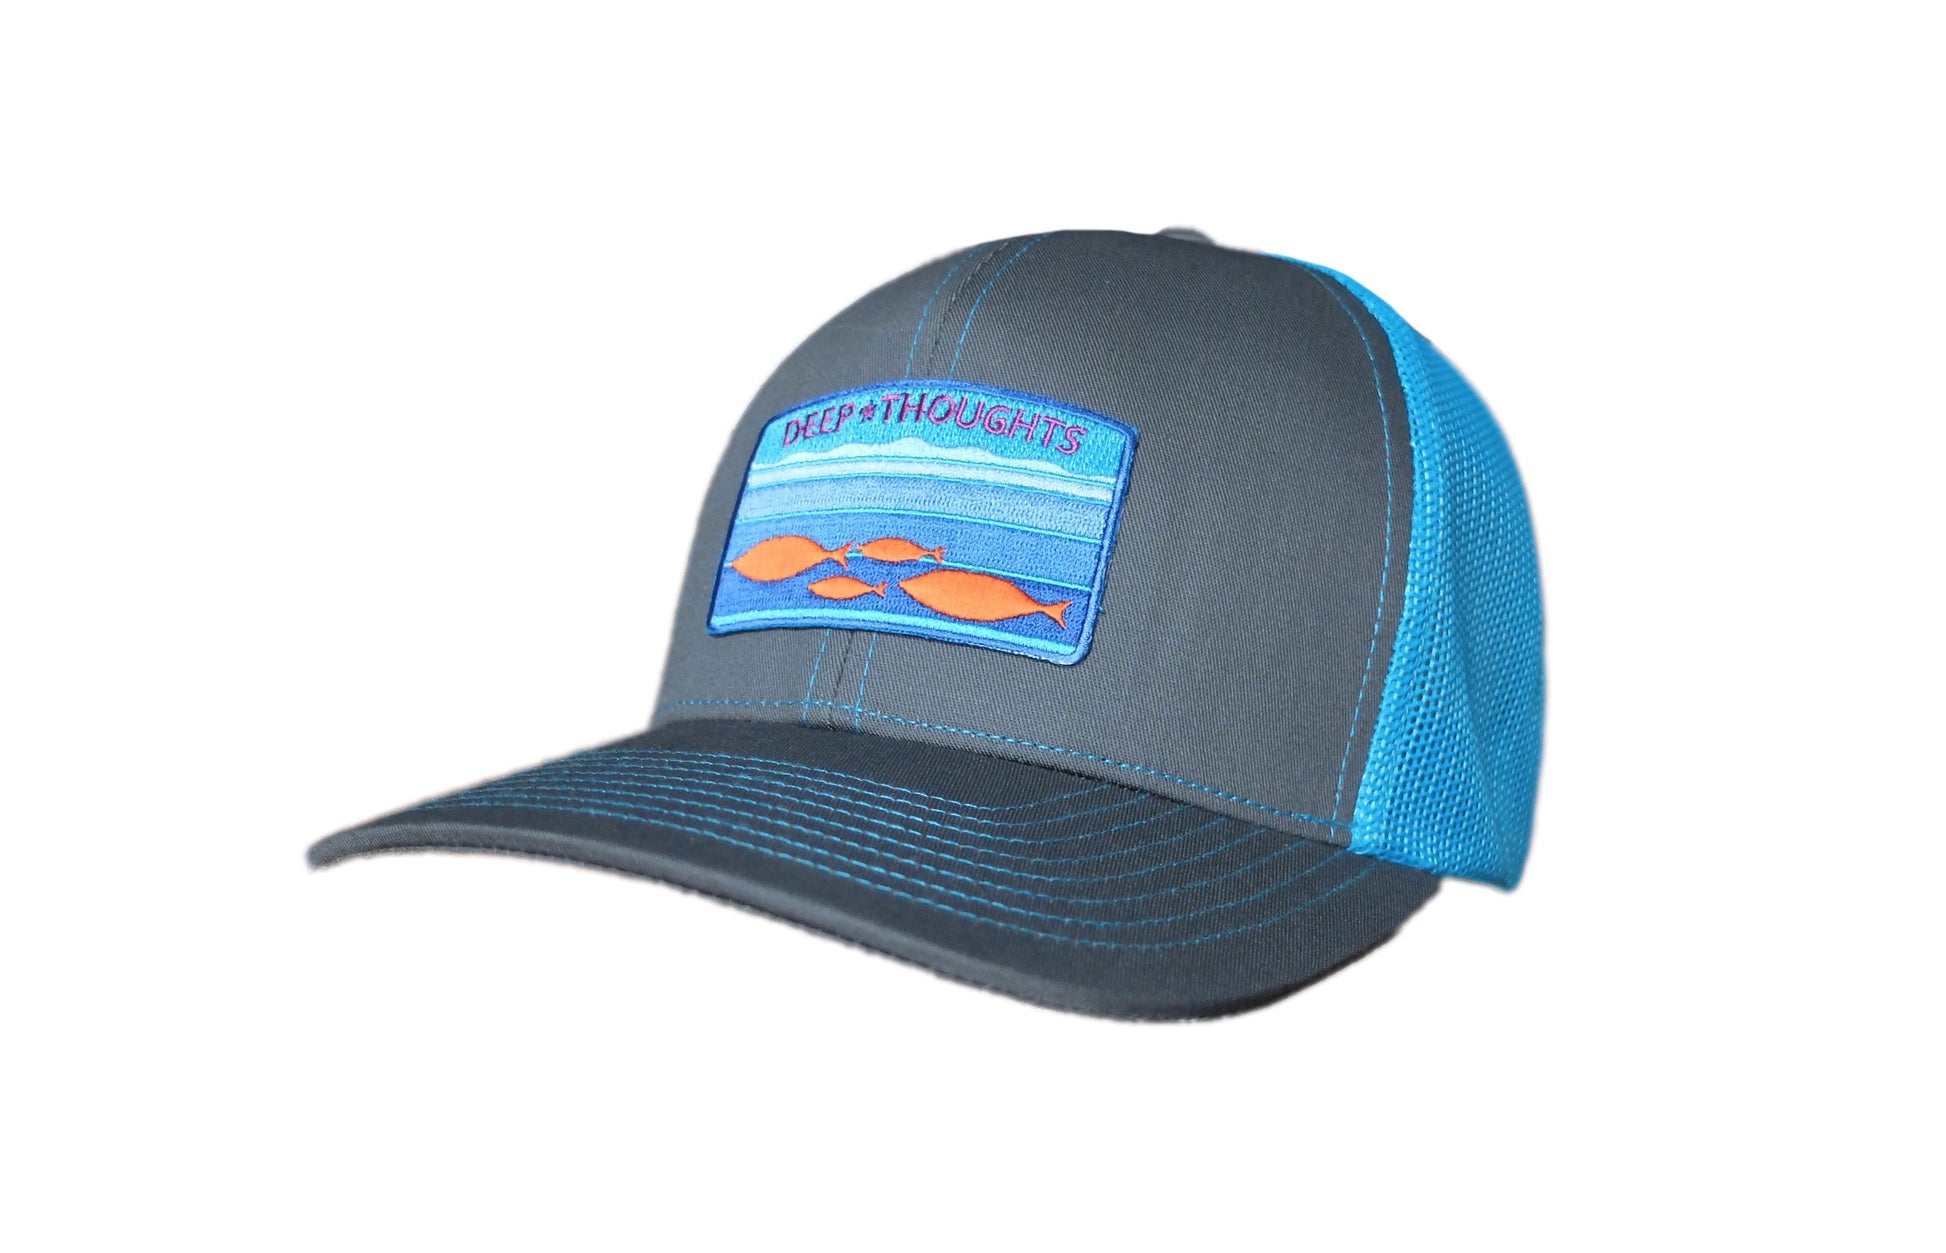 structured dark grey and neon blue trucker hat with aqua colored embroidered patch showing fish under water